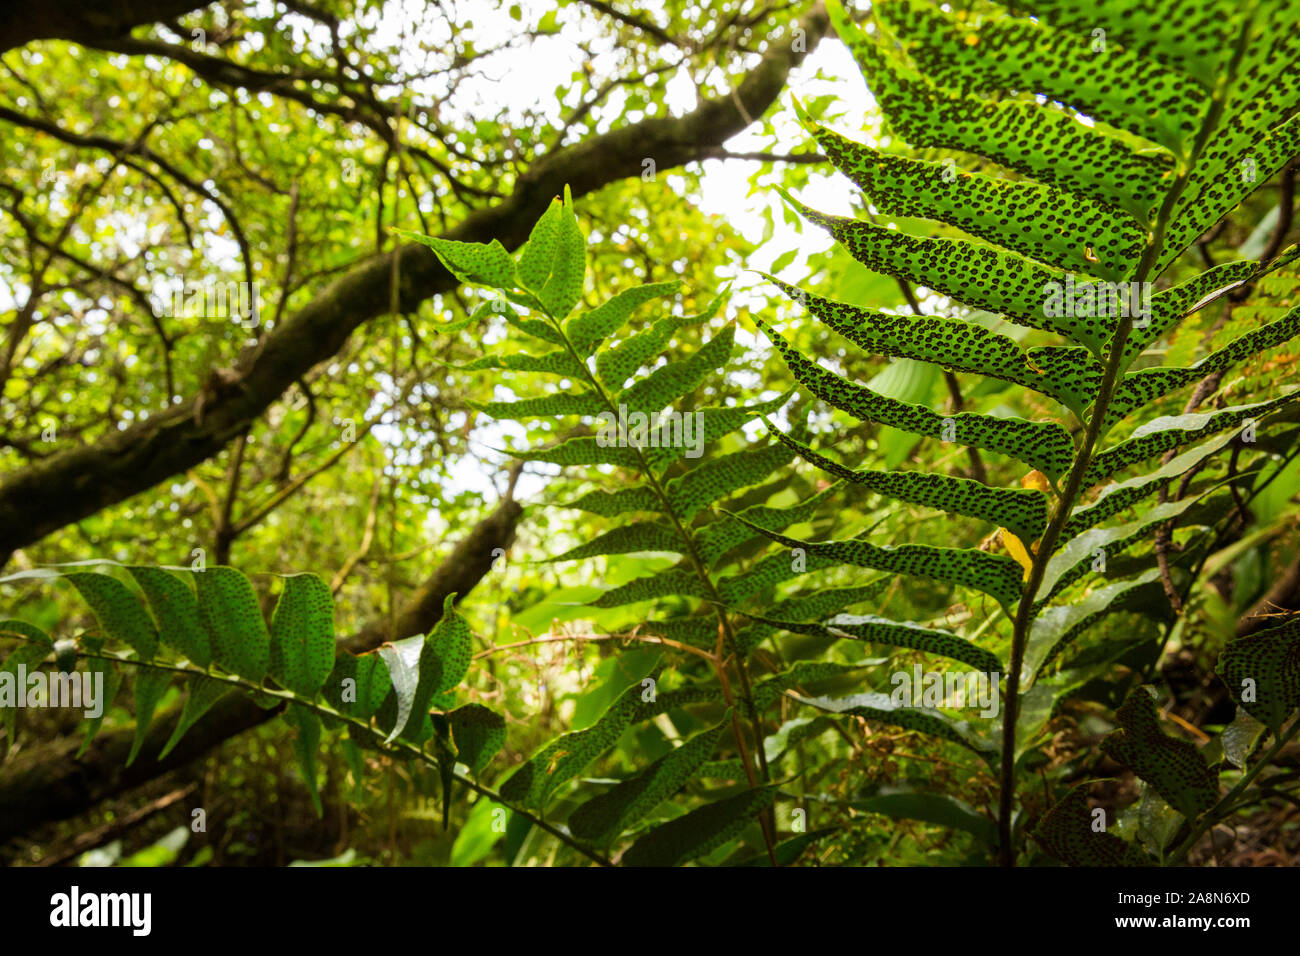 Japanese holly fern in Faial forest. Azores, Portugal Stock Photo